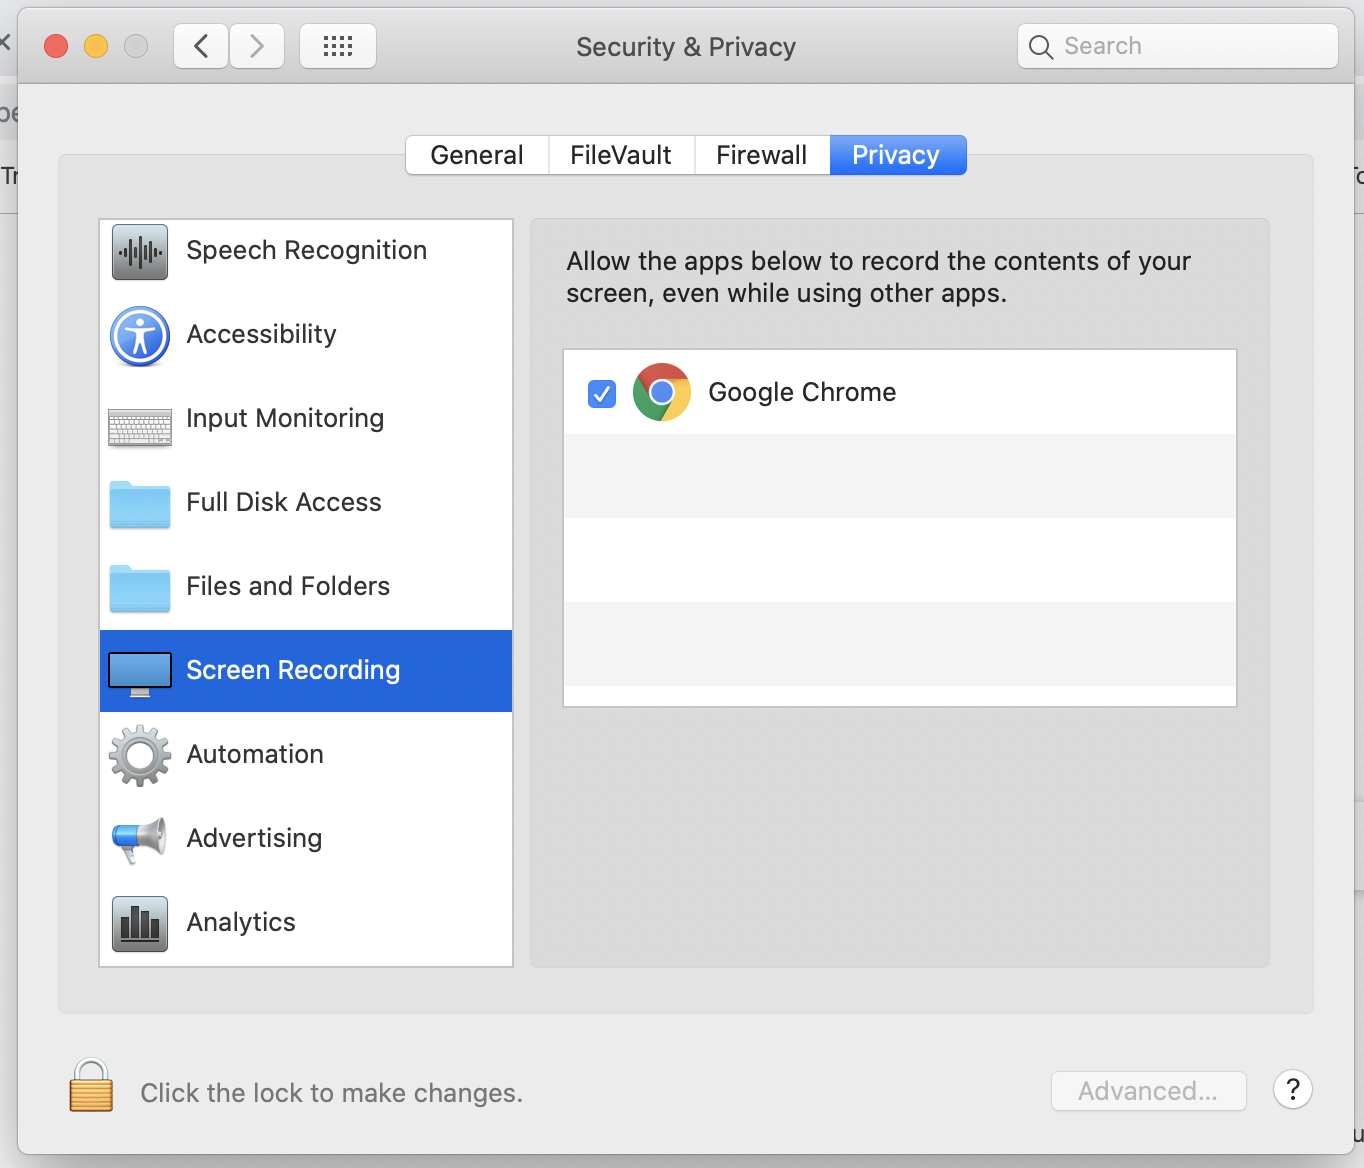 where can i find system preferences on my mac for scrapbook firefox